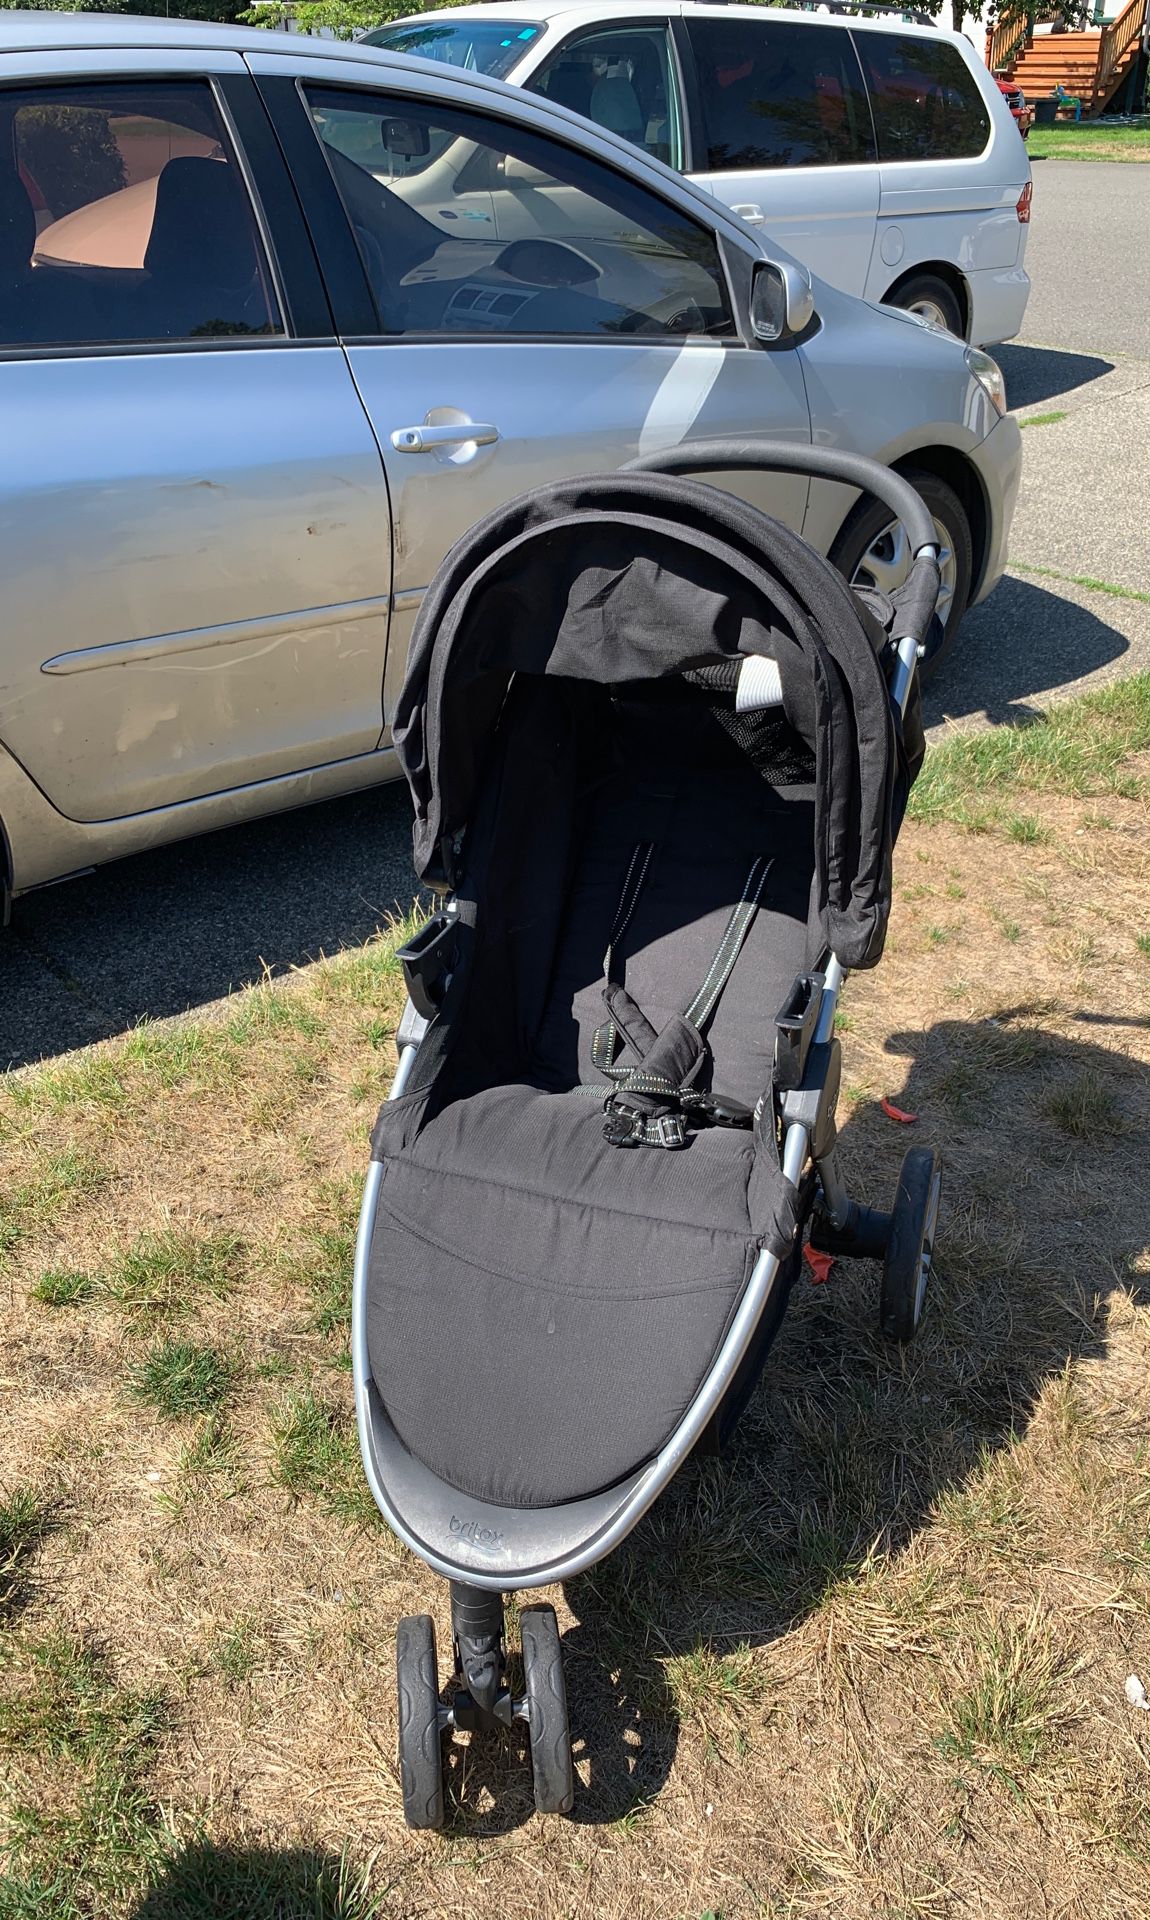 Britax travel system (car seat, base and stroller)